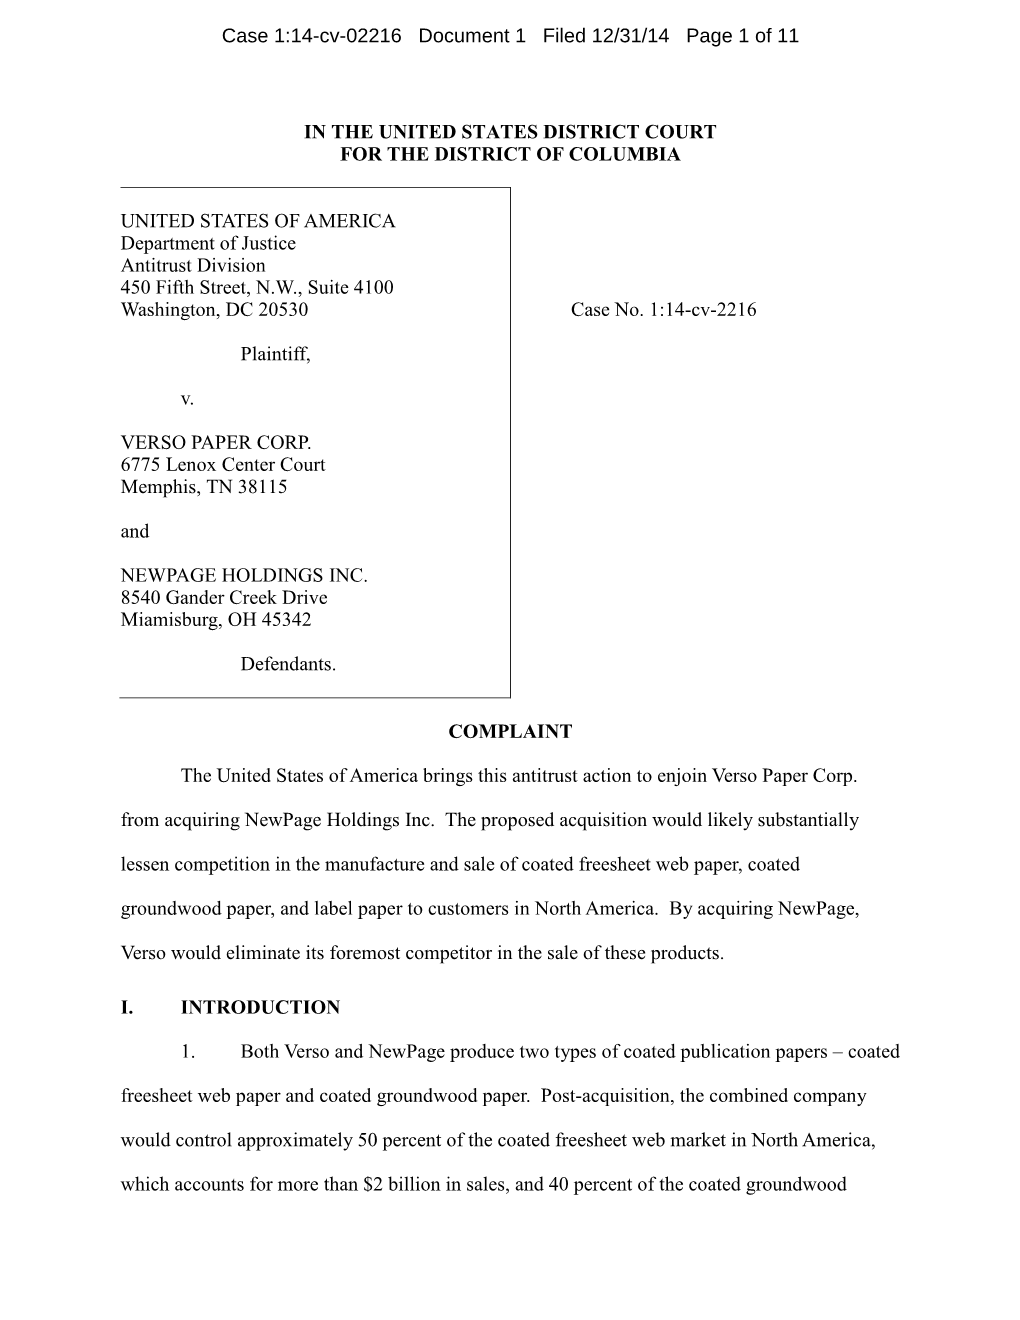 Complaint: U.S. V. Verso Paper Corp. and Newpage Holdings Inc